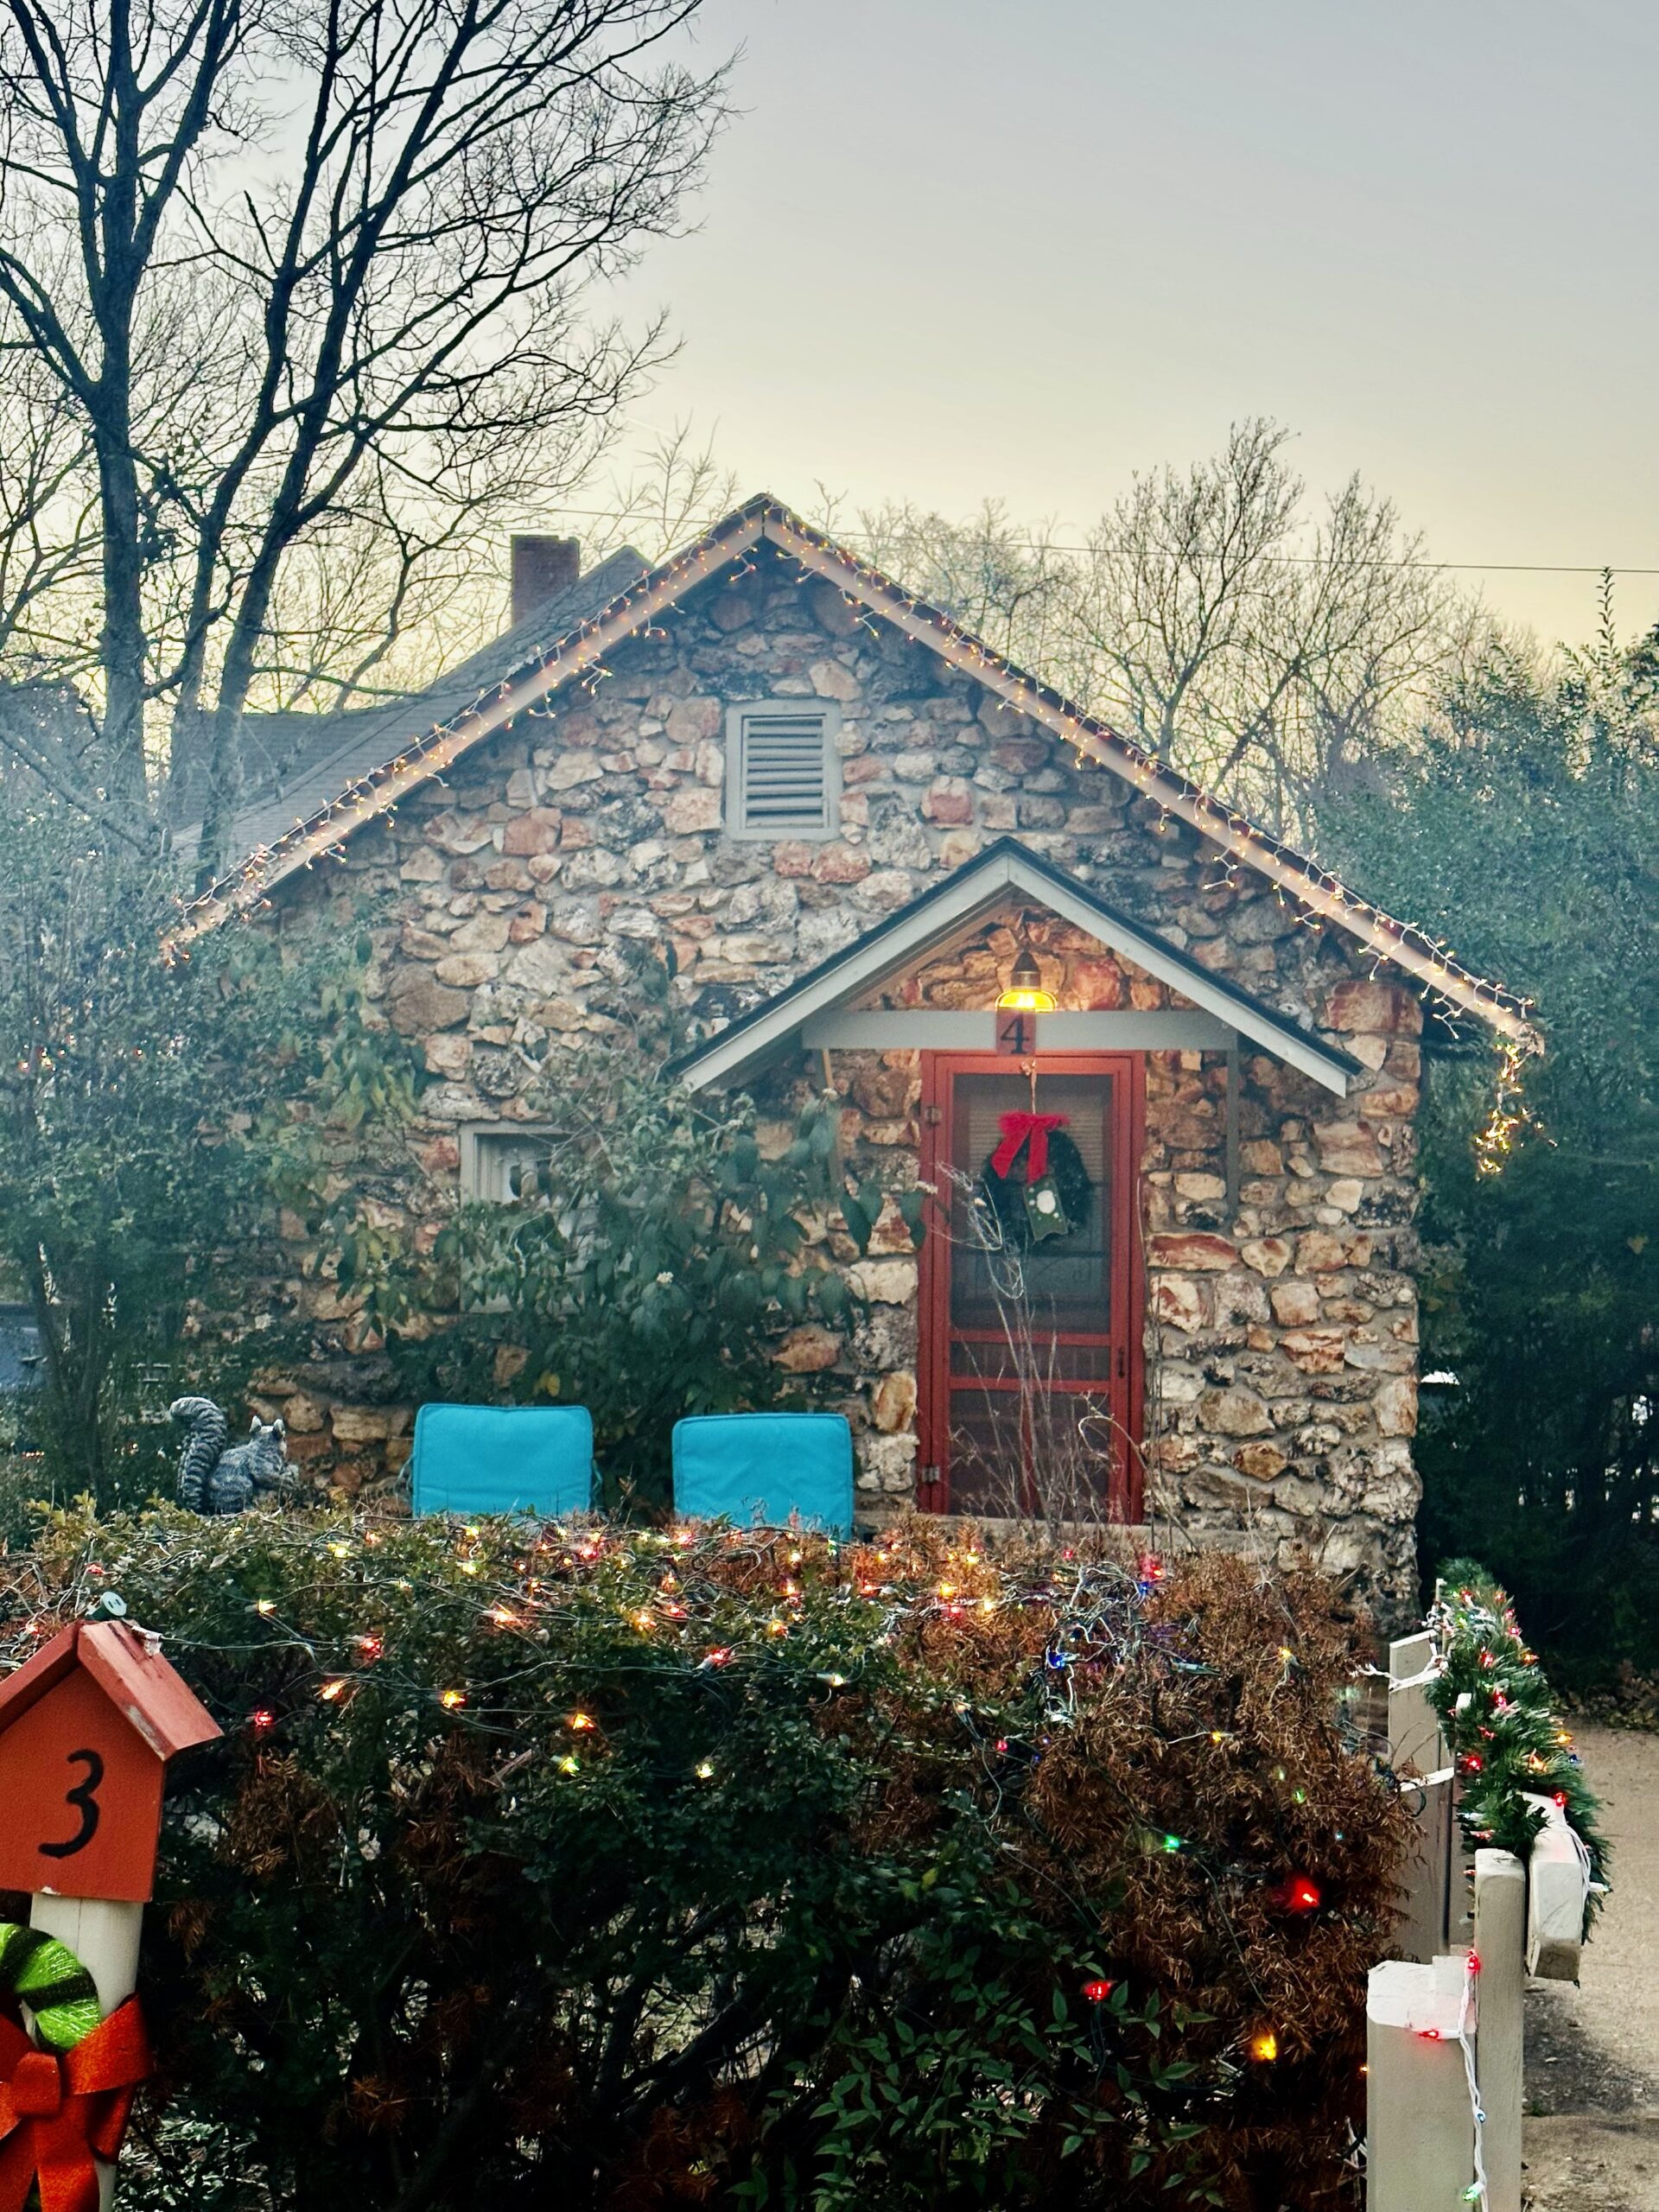 5 Reasons to Stay at the Rock Cottages Bed and Breakfast in Eureka Springs